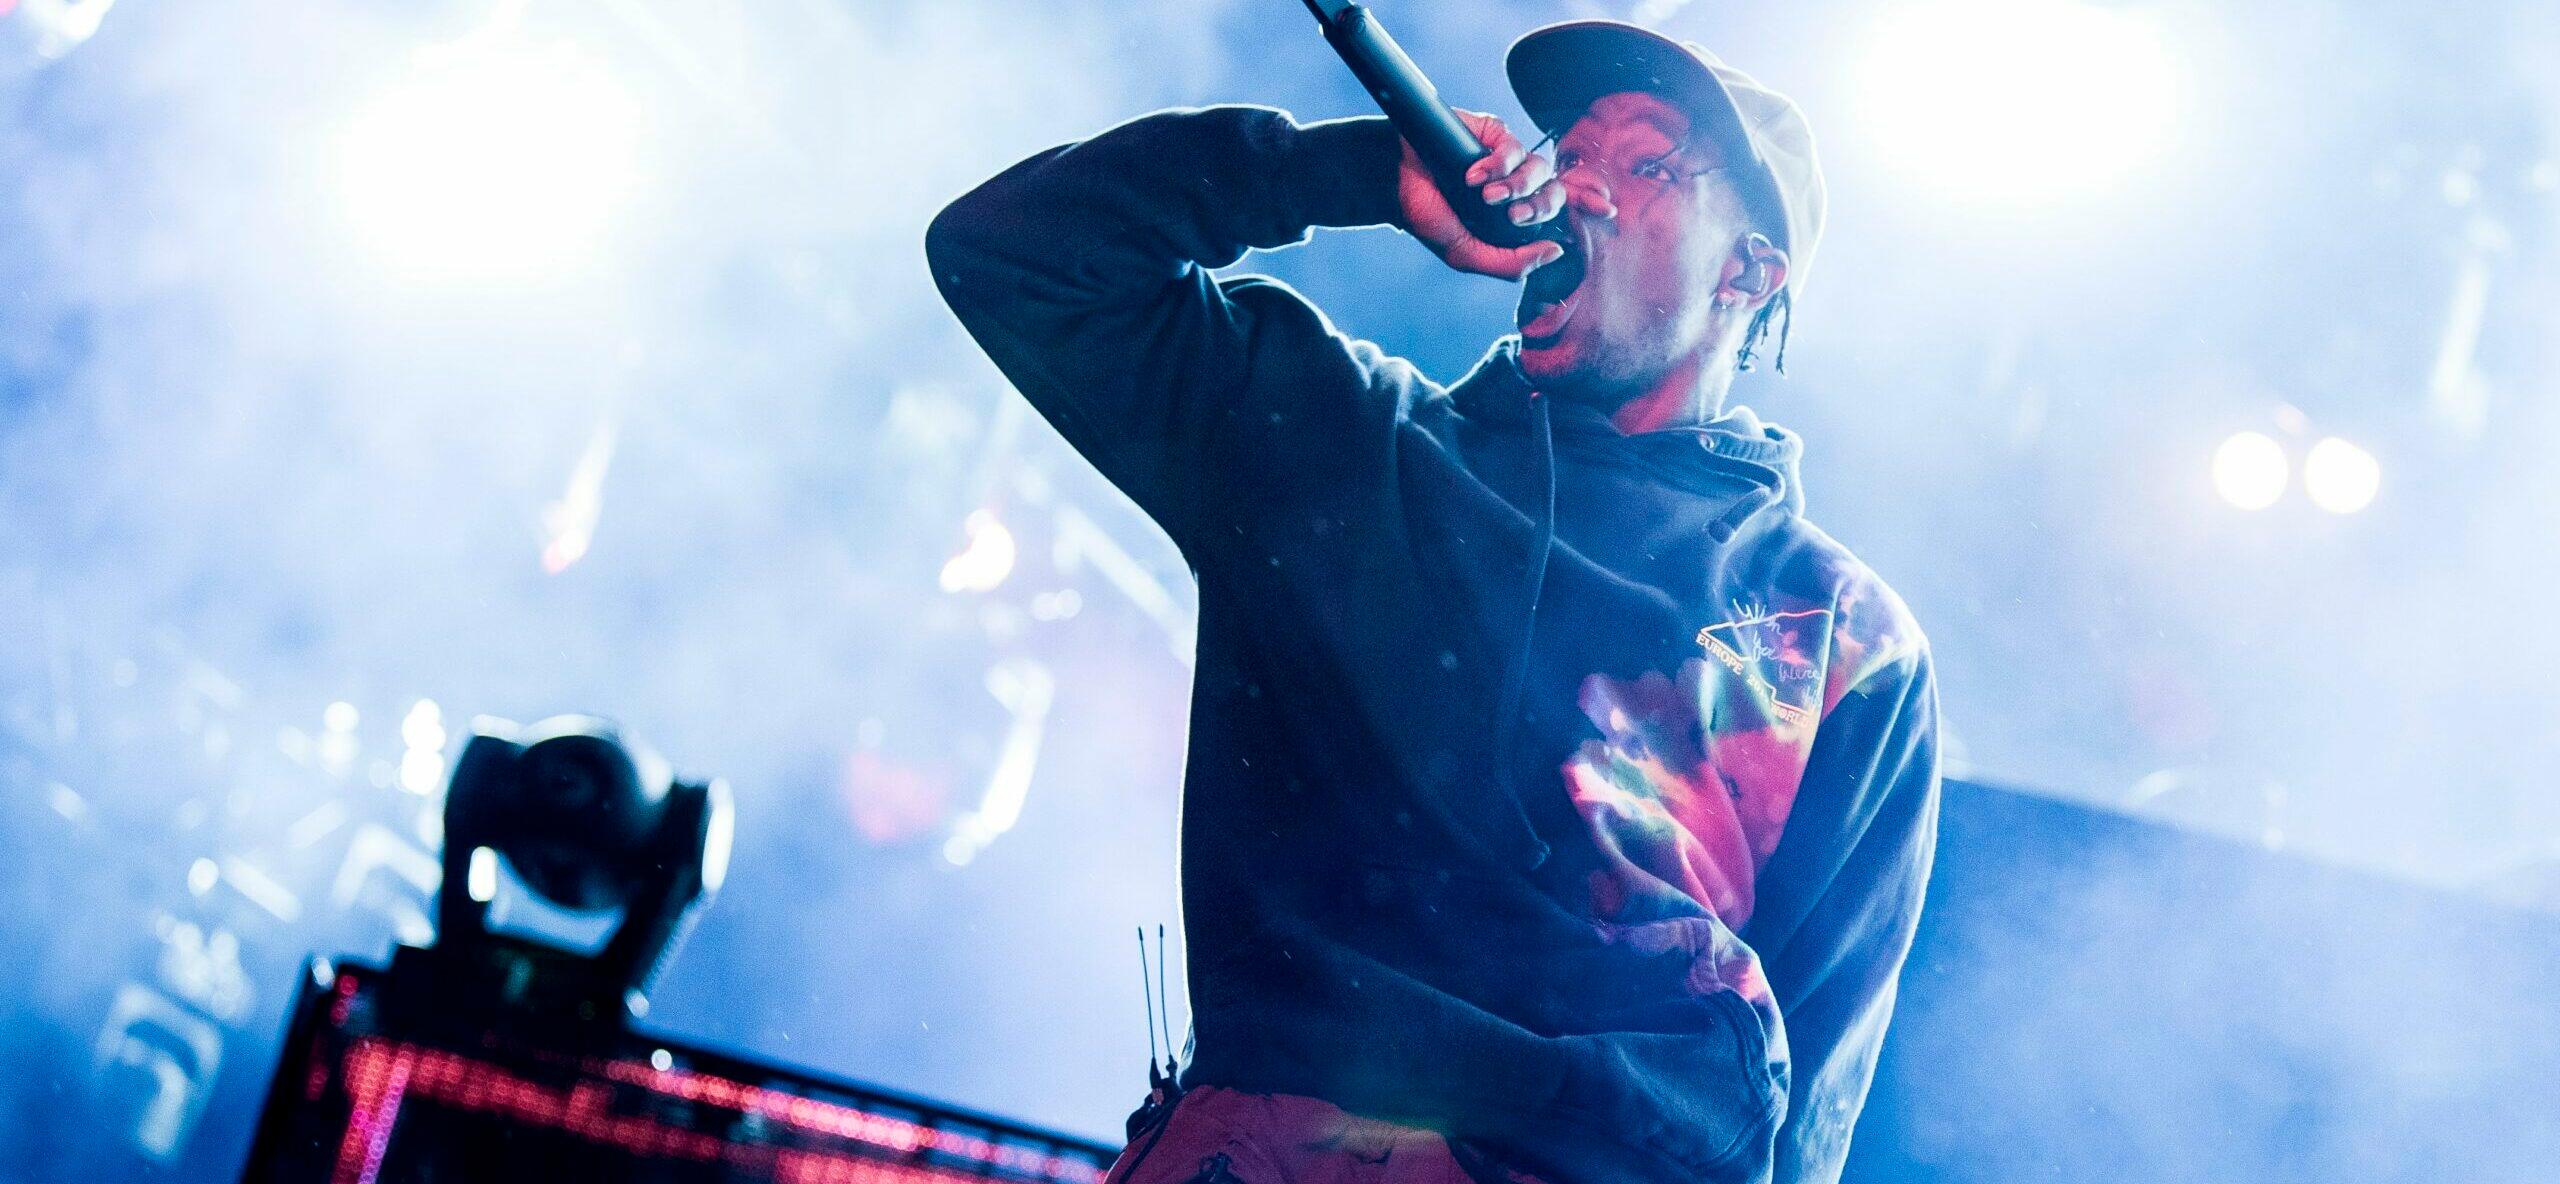 Travis Scott Sued By 9-Year-Old ‘Astroworld’ Victim Who Is On Life Support